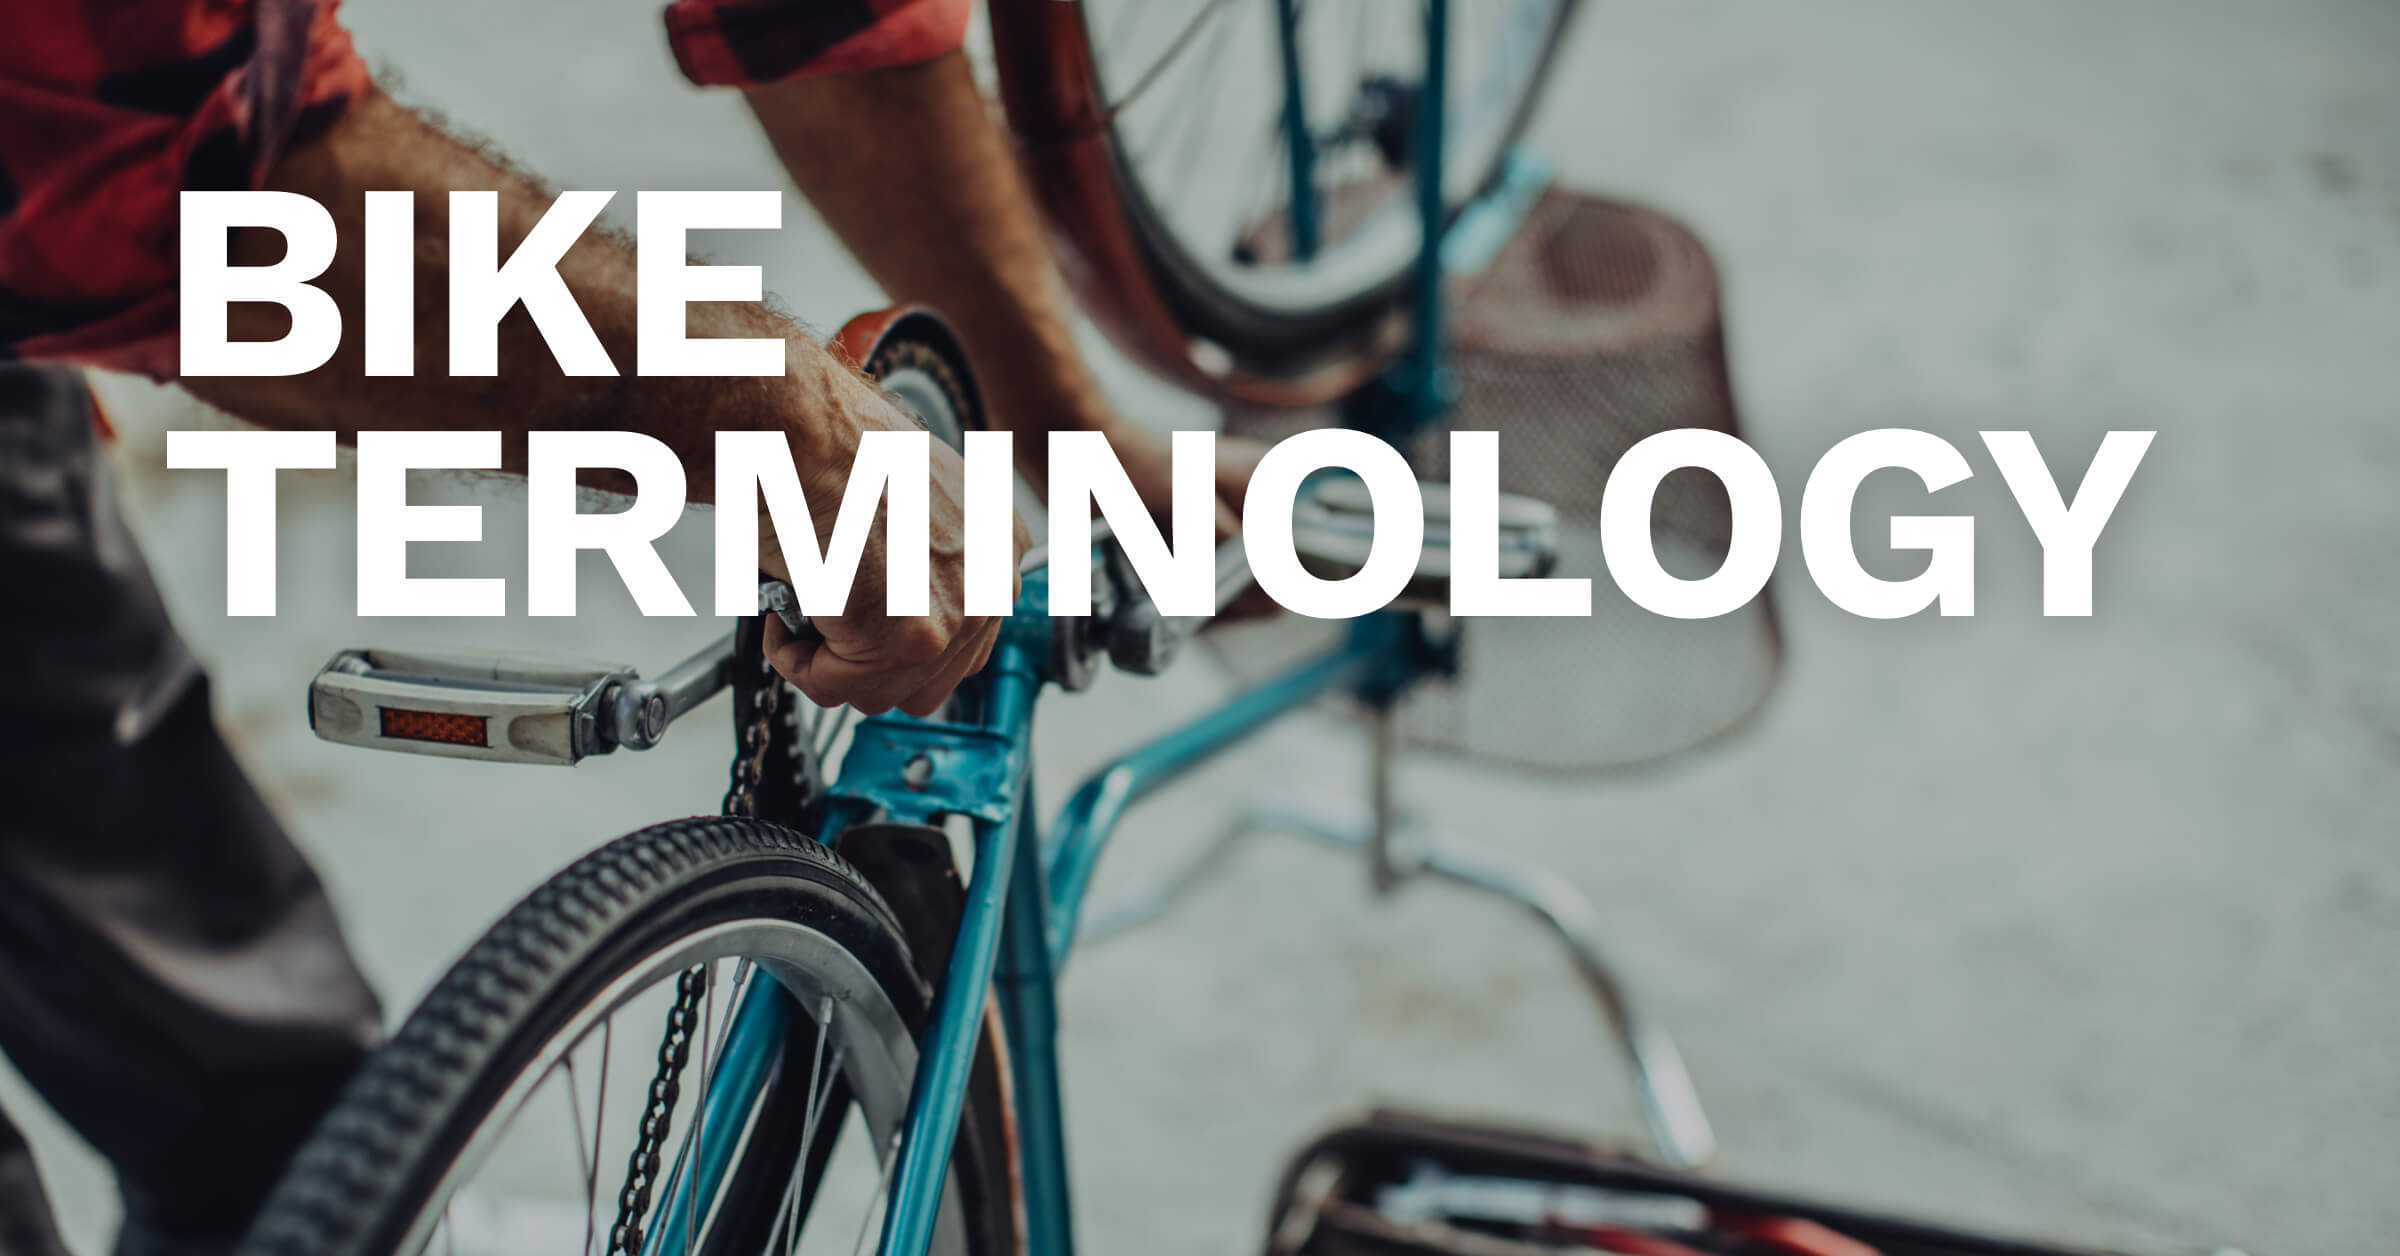 ​Bike Terminology: Getting to know bike parts